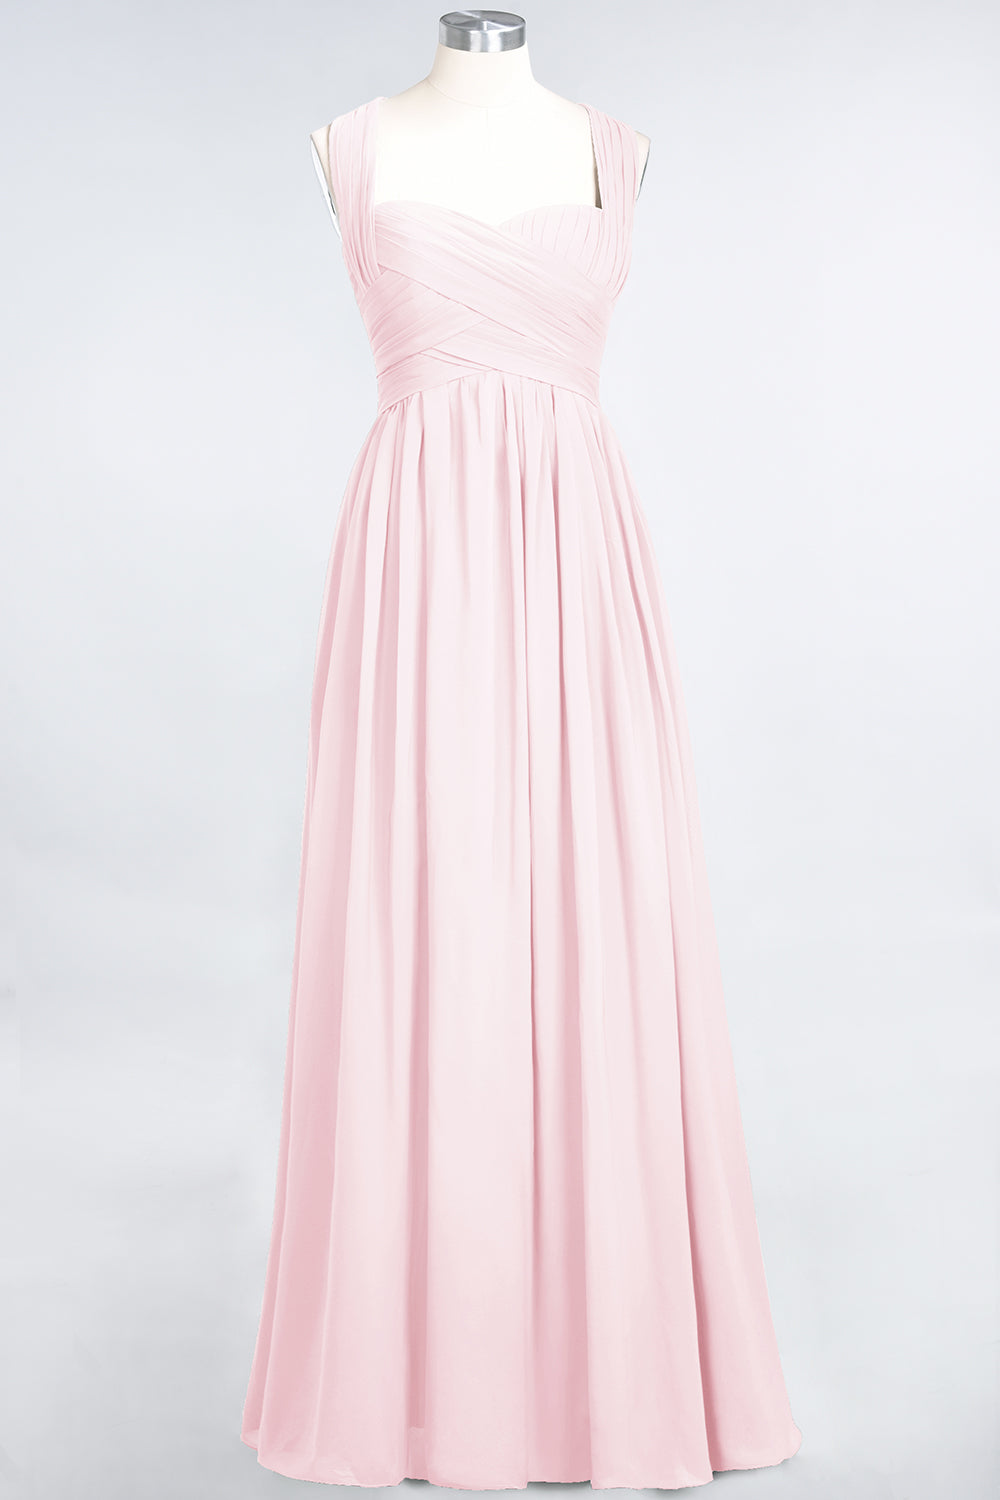 Chic Tiered Sweetheart Cap-Sleeves Bungurdy Bridesmaid Dresses-27dress